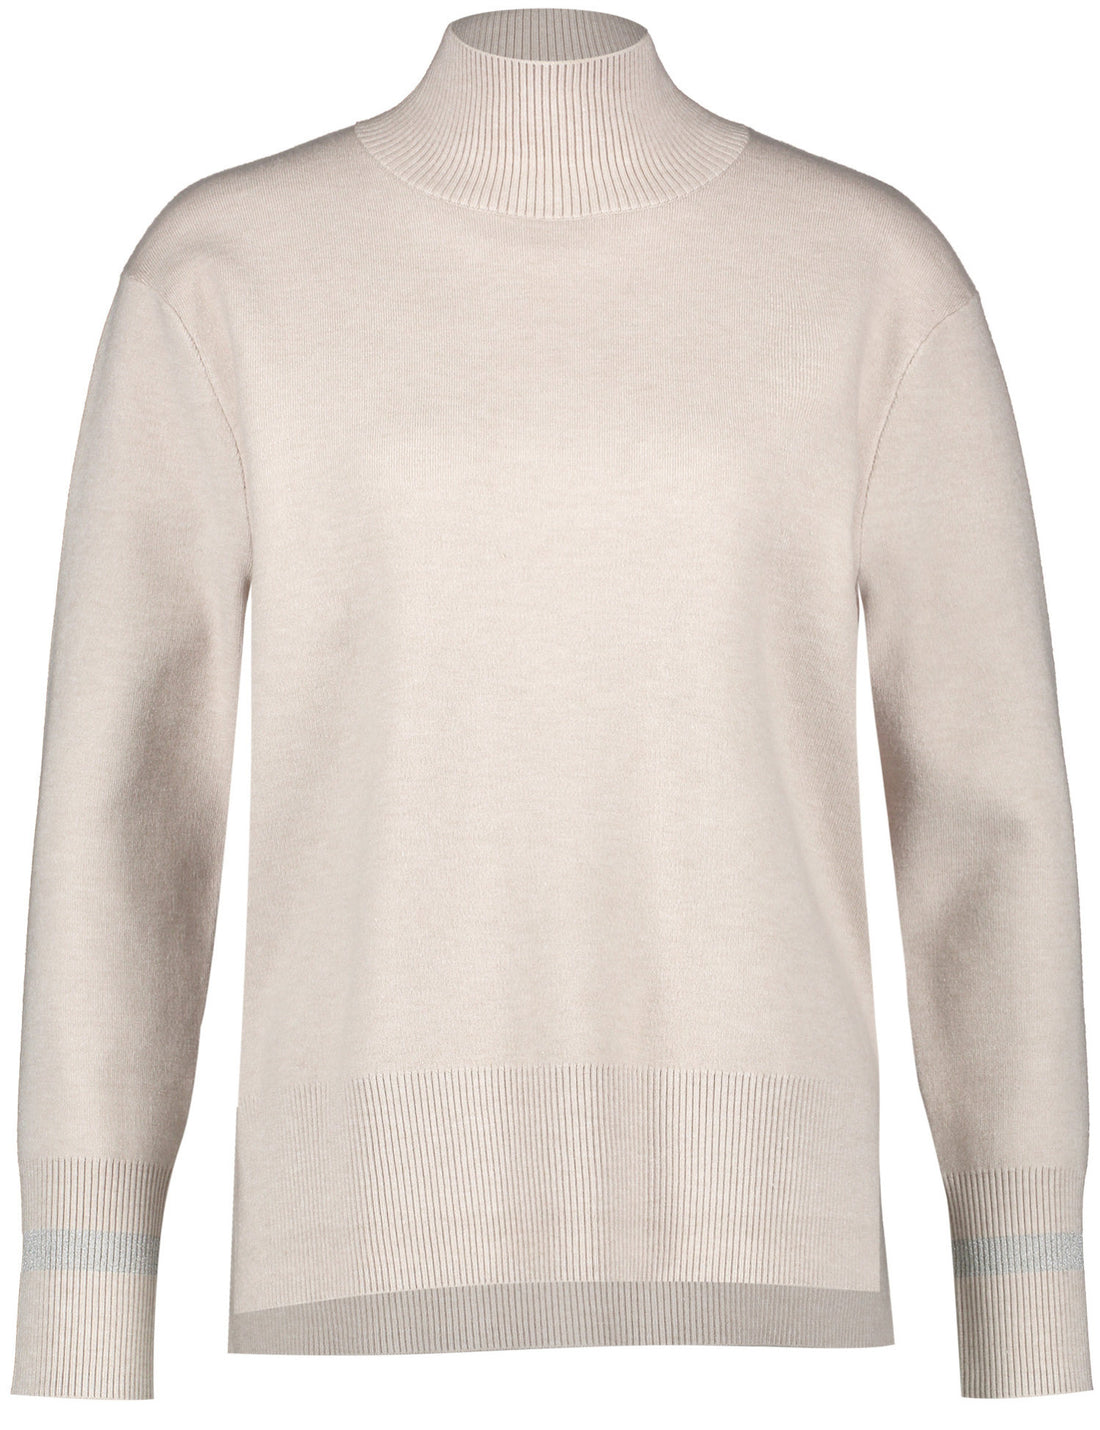 Soft Jumper With A Turtleneck And Elongated Back Section_271033-35708_905440_02